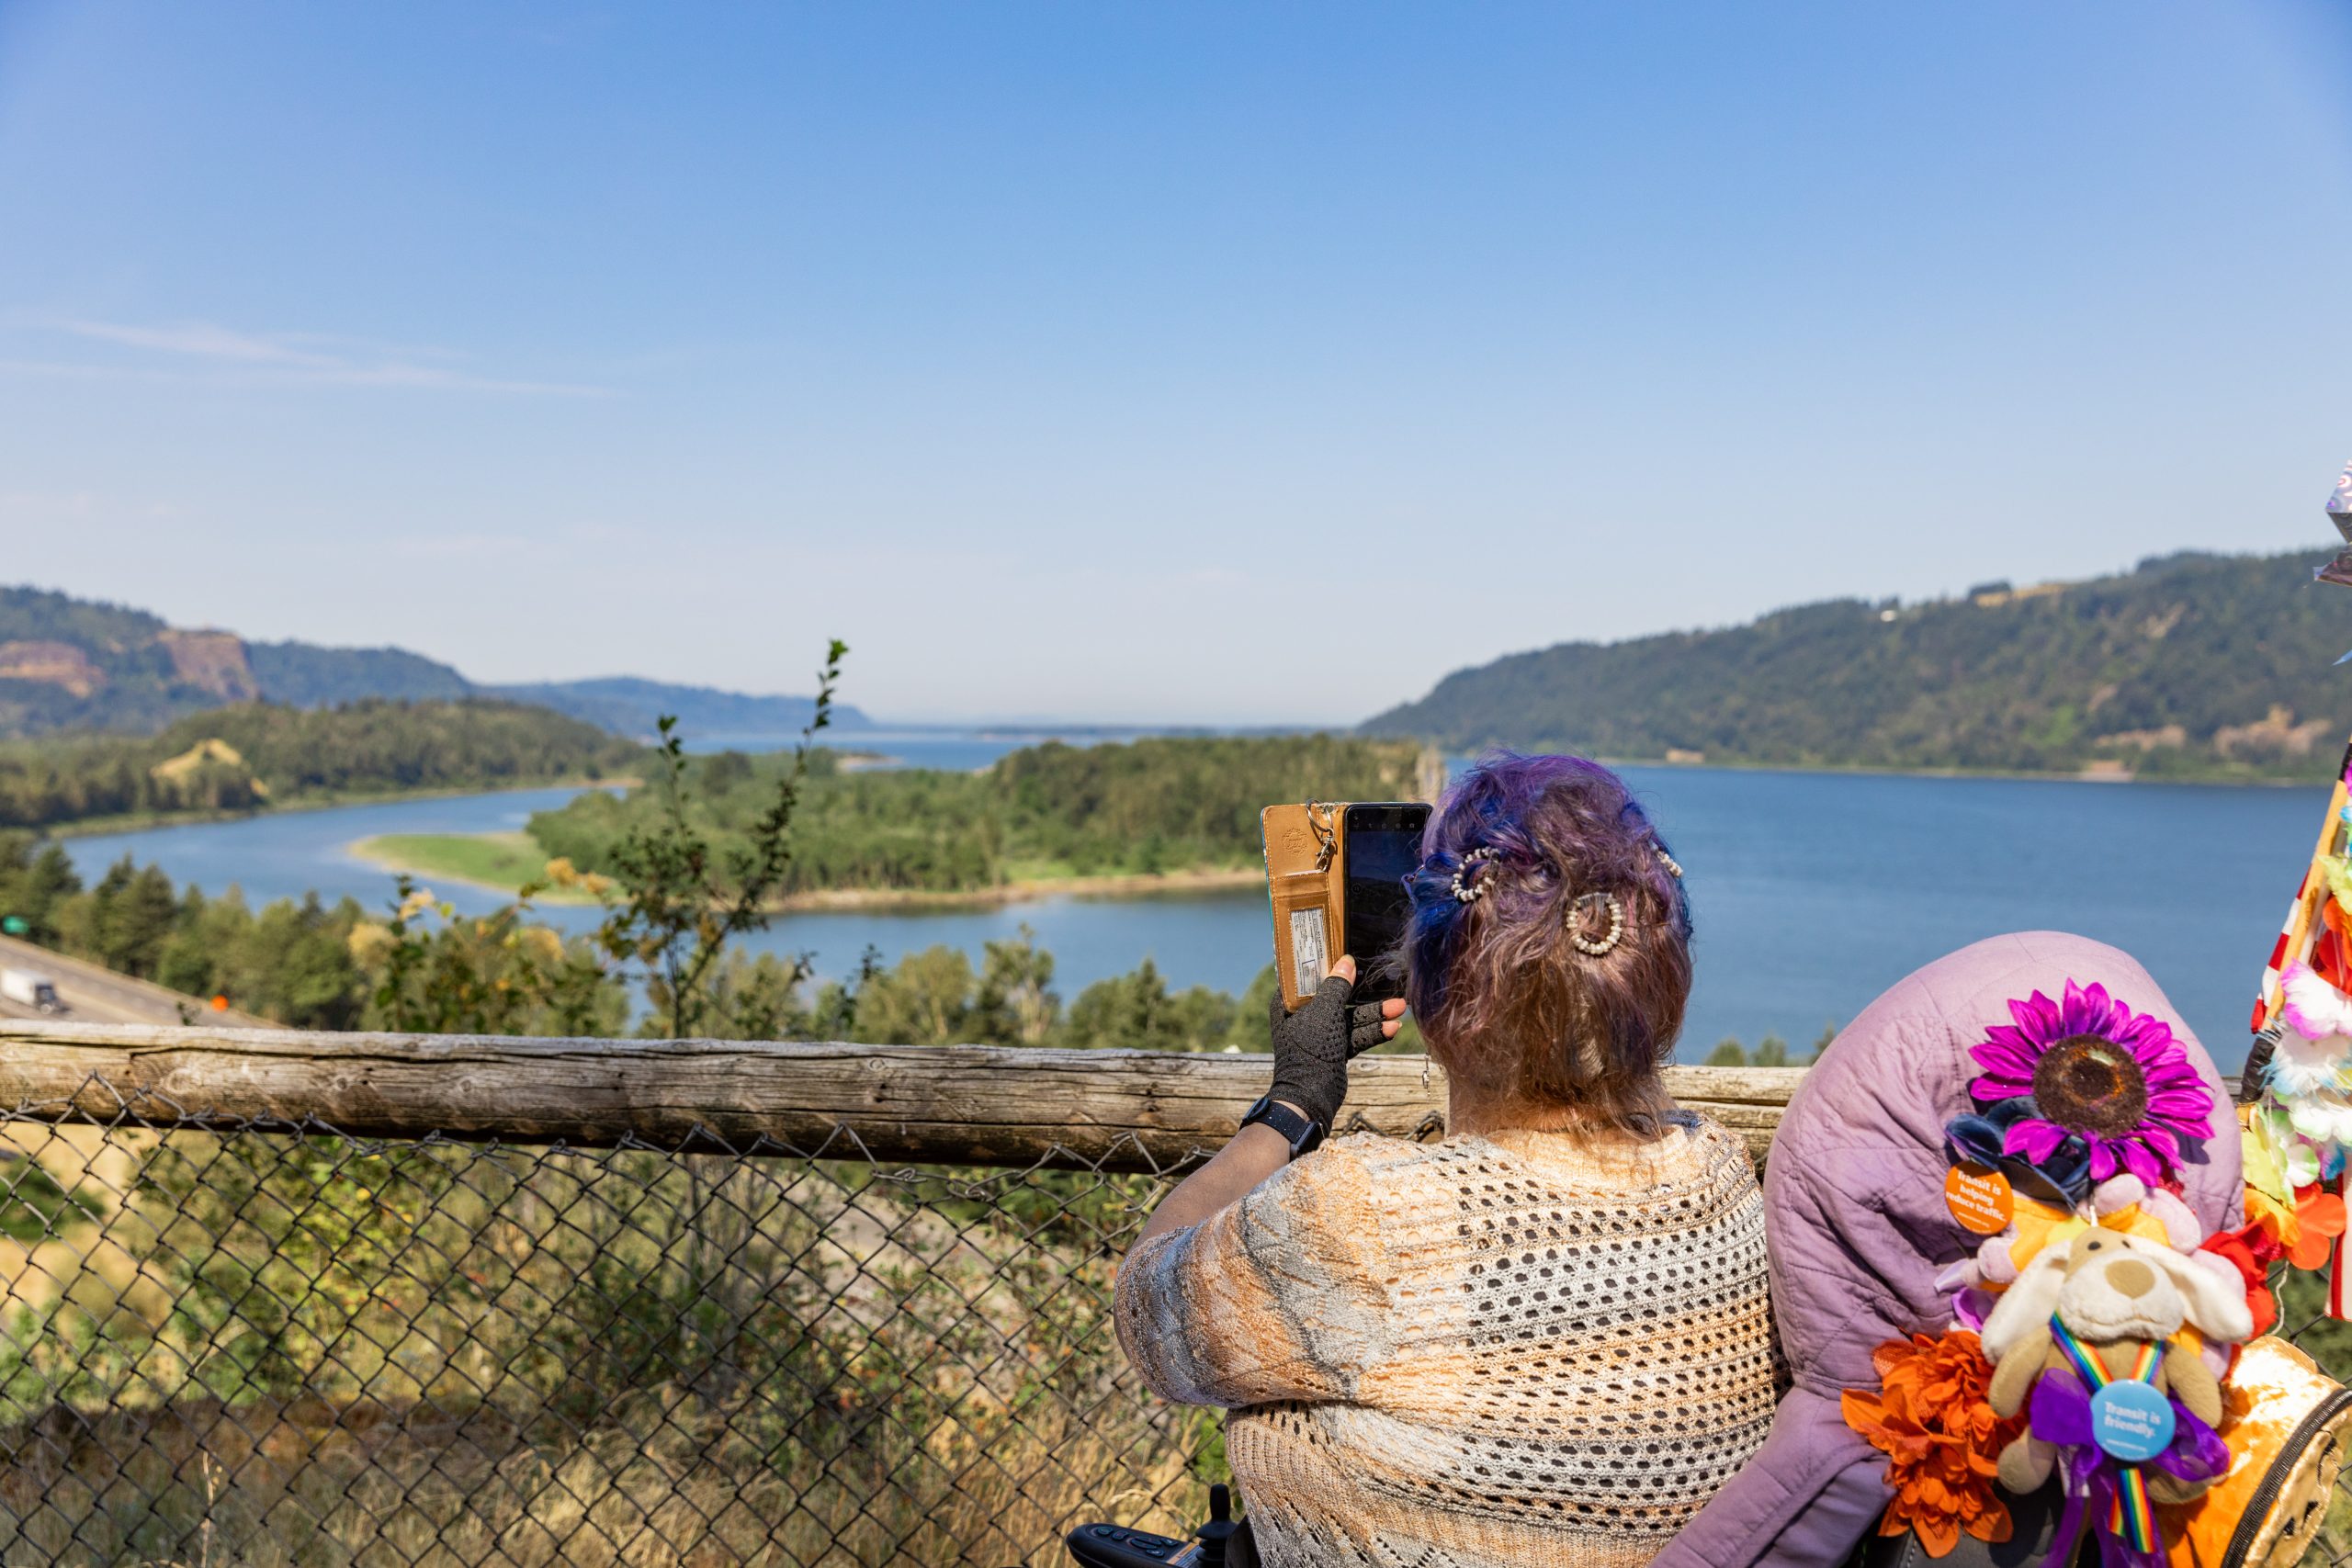 The picture shows a view from the Overlook Trail with the Columbia River taking up most of the photo. The shore on either side is visible with an island sitting in the middle. In the foreground a woman in a motorized wheelchair is taking a picture with her phone over a fence.